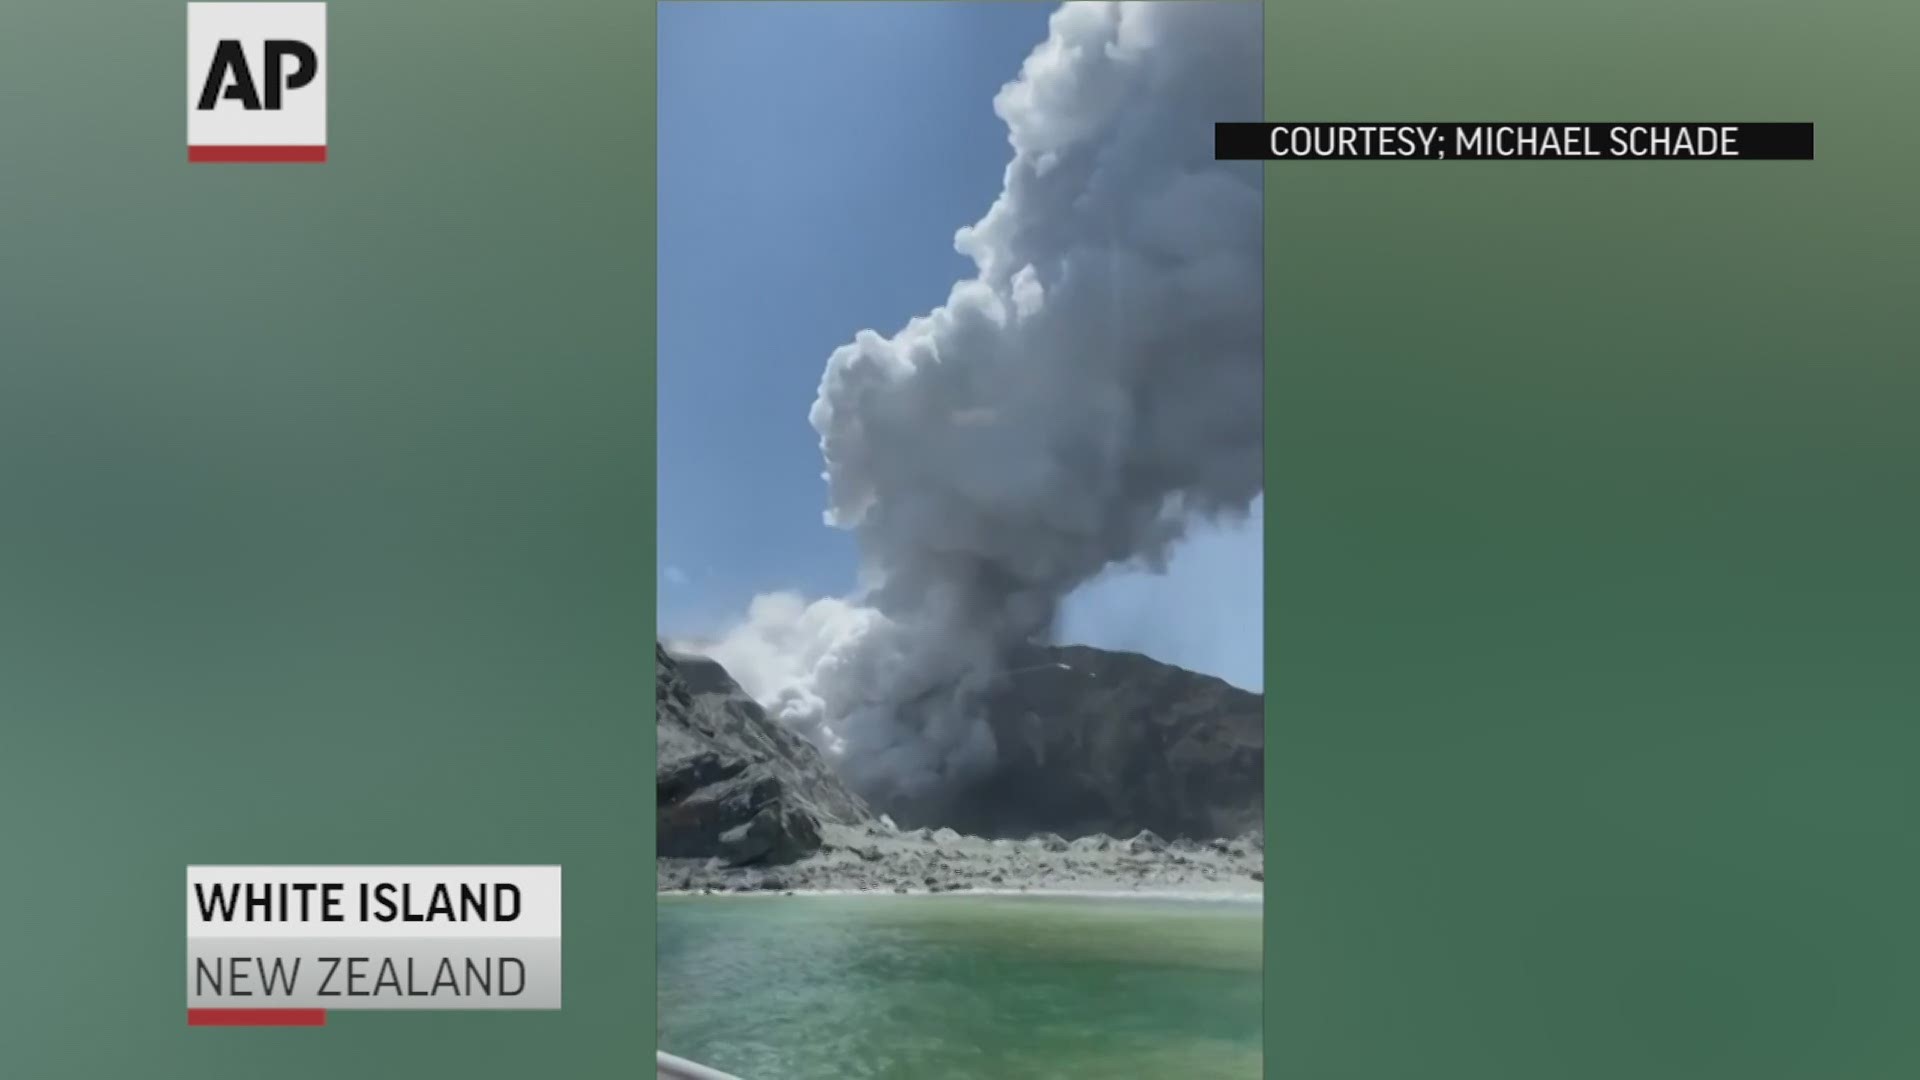 A New Zealand volcanic island spewed a massive eruption of ash and steam while dozens of tourists were exploring it on Monday afternoon.